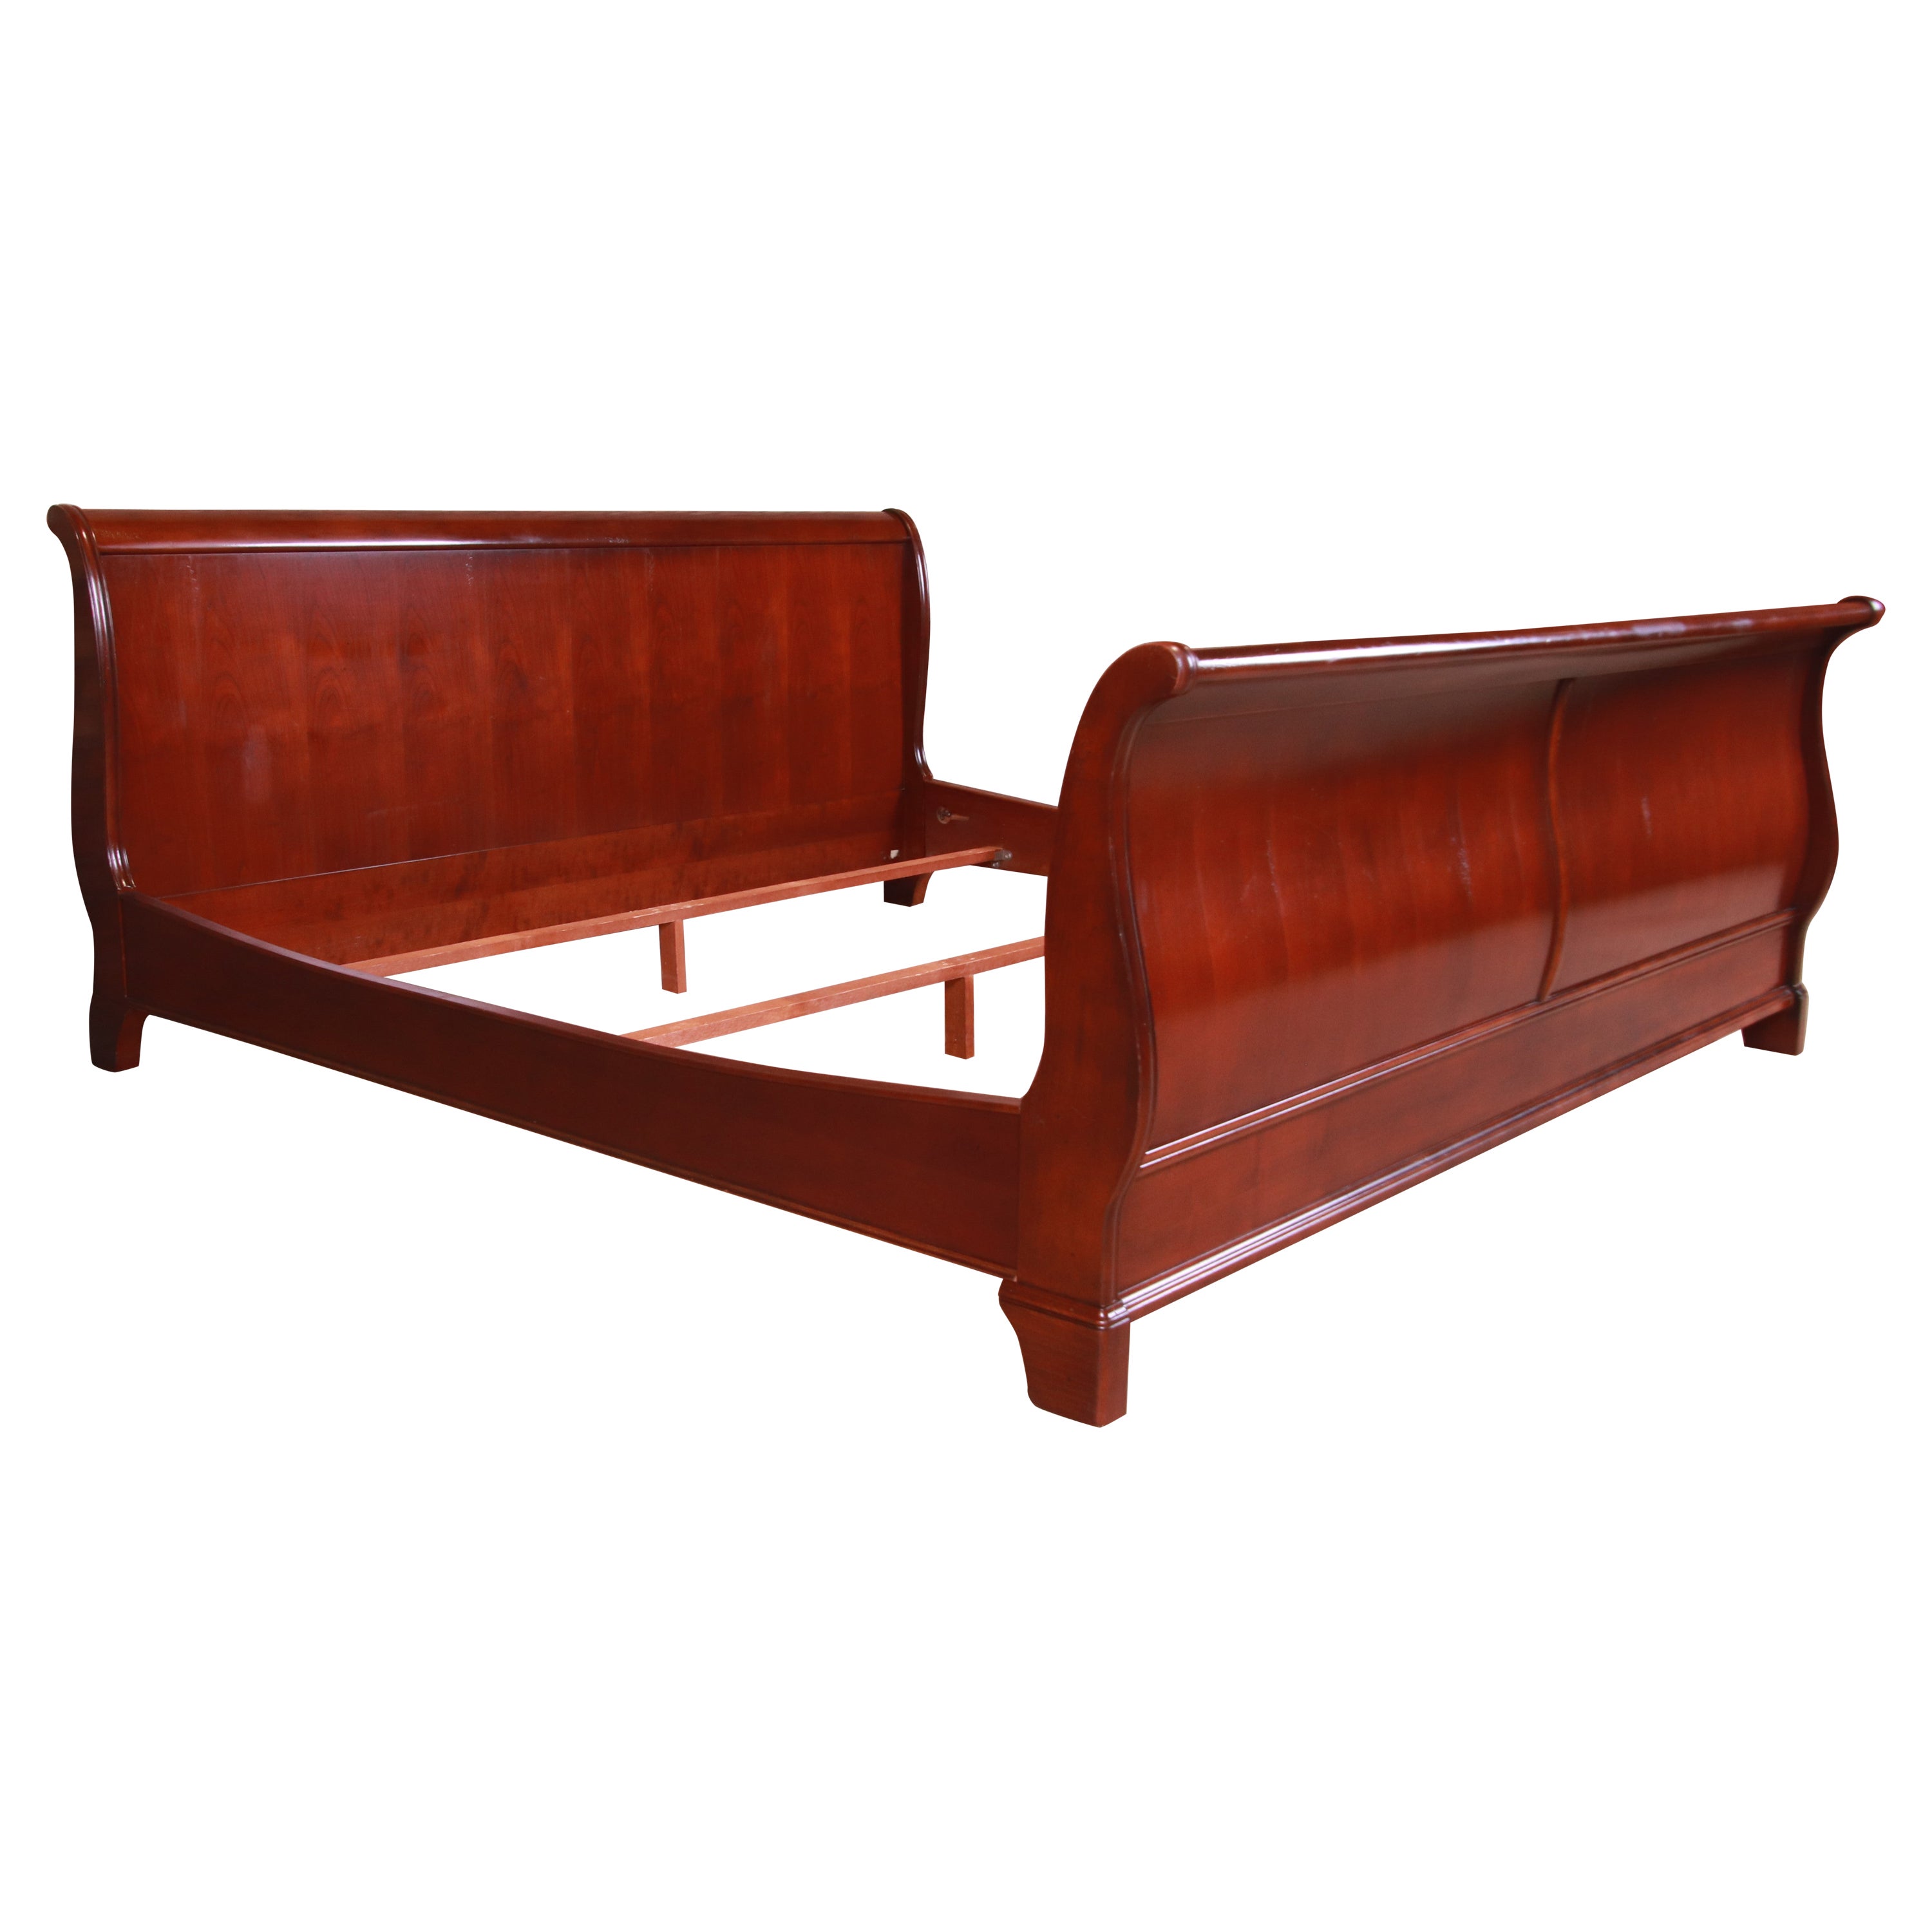 Louis Philippe Cherry Wood King Size, Cherry Wood King Size Bed Frame